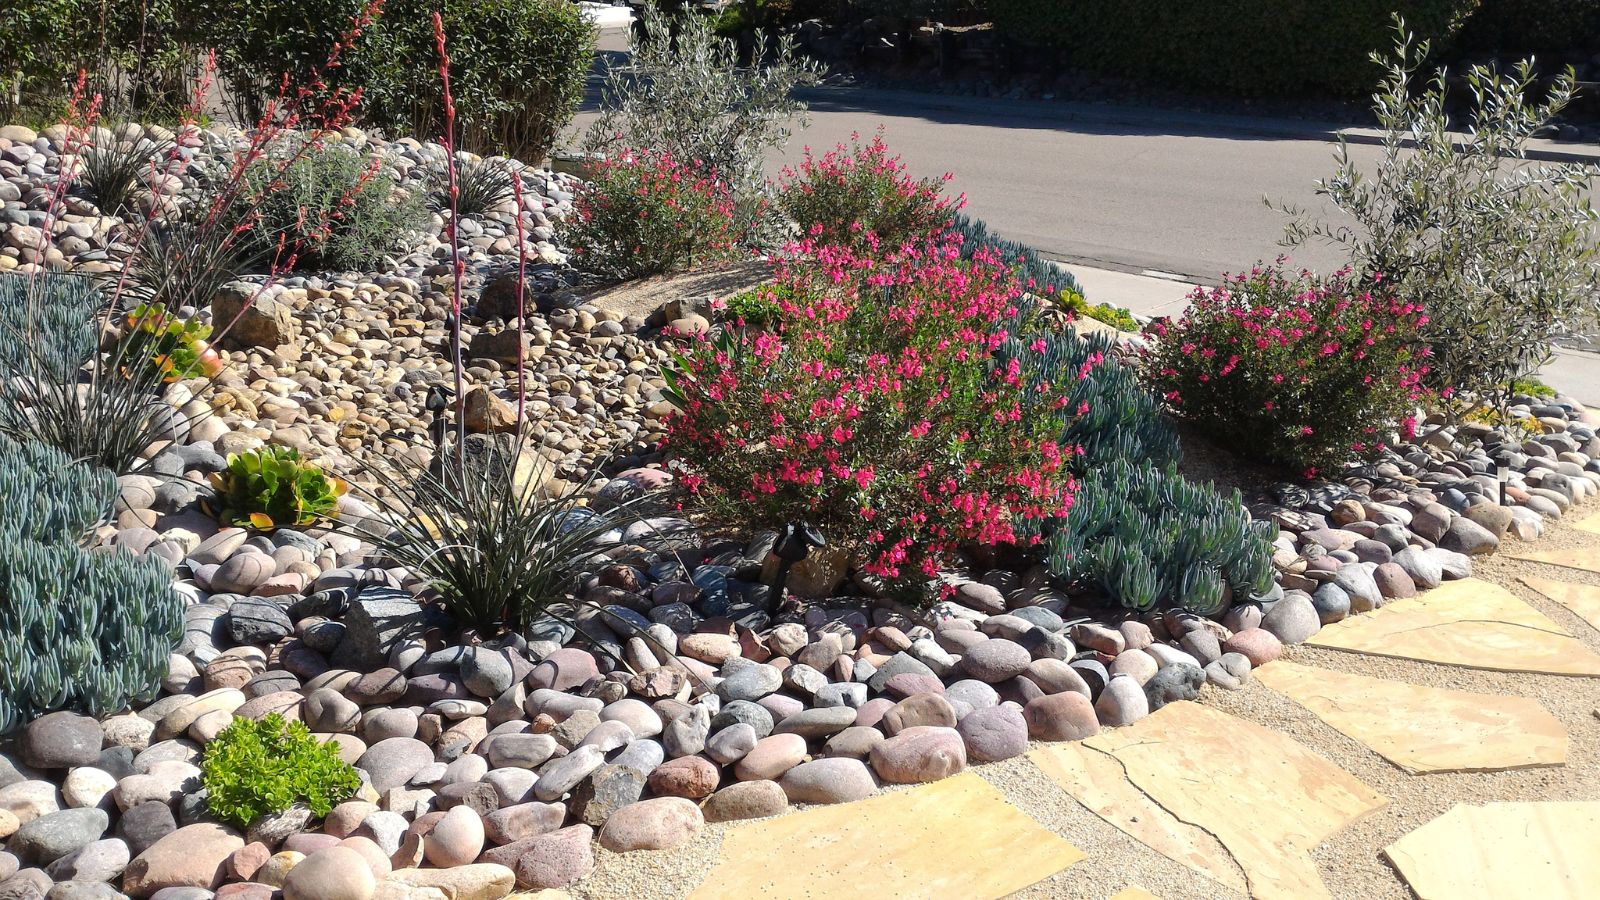 Use rocks and mulch to create stunning landscaping features in your yard